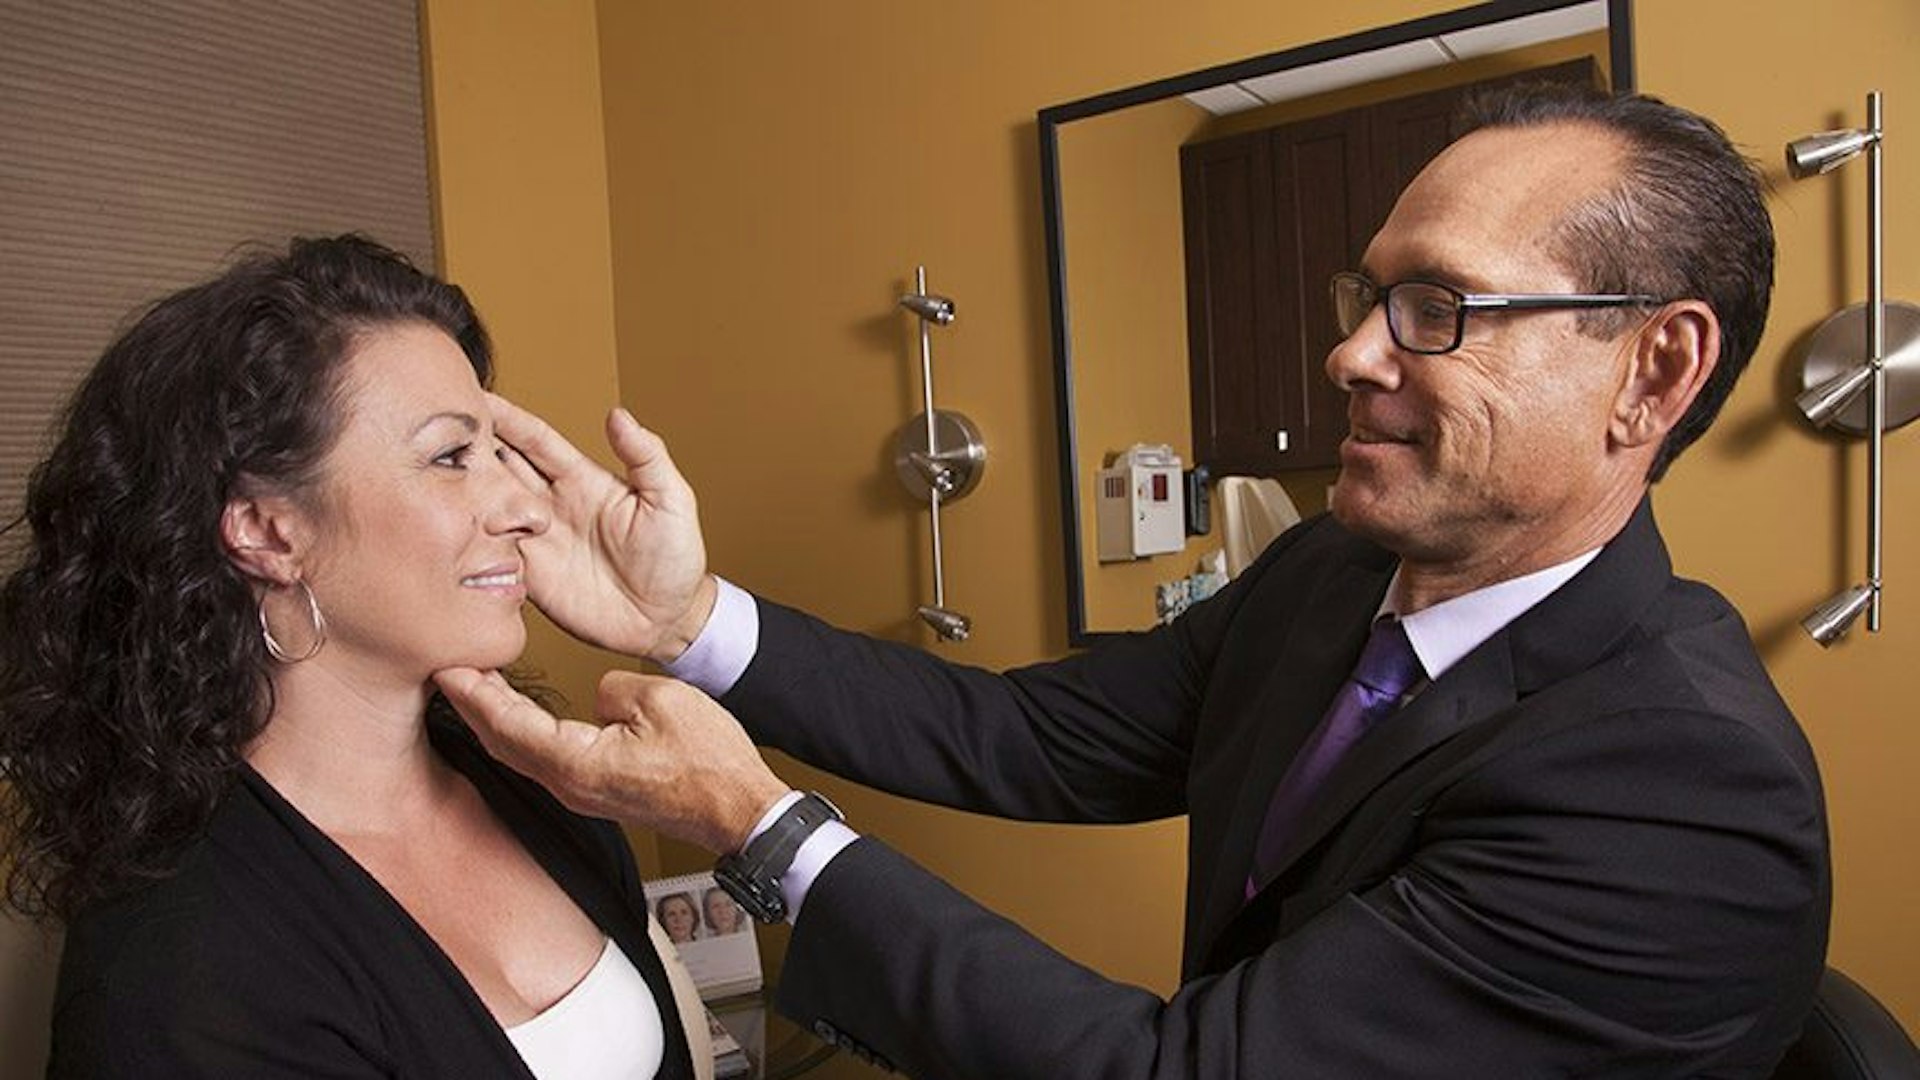 Dr. George Orloff assessing the face of a female patient in the exam room